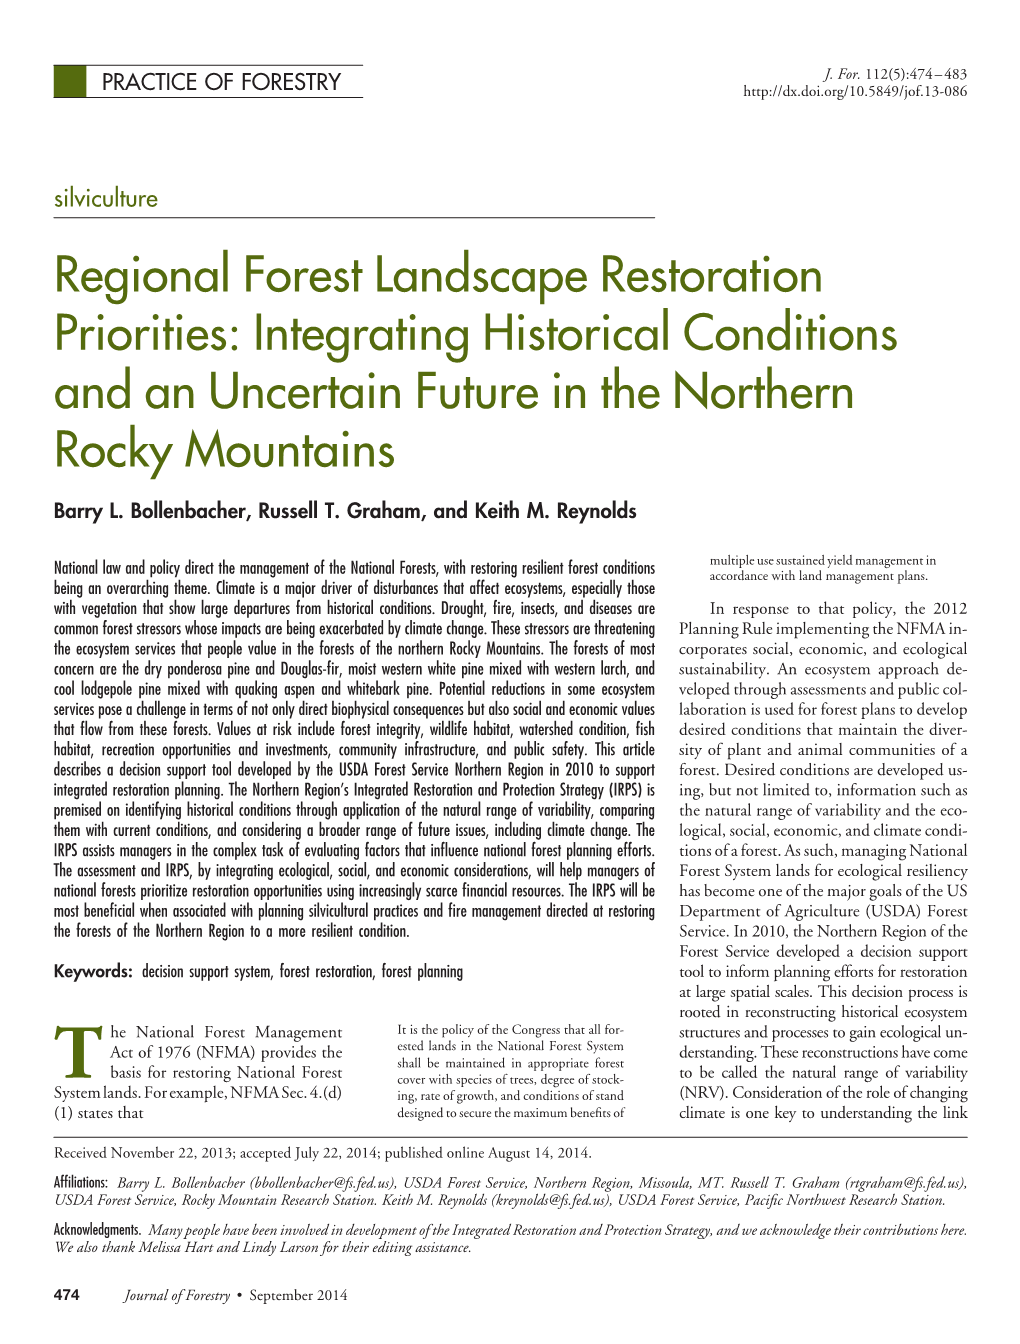 Regional Forest Landscape Restoration Priorities: Integrating Historical Conditions and an Uncertain Future in the Northern Rocky Mountains